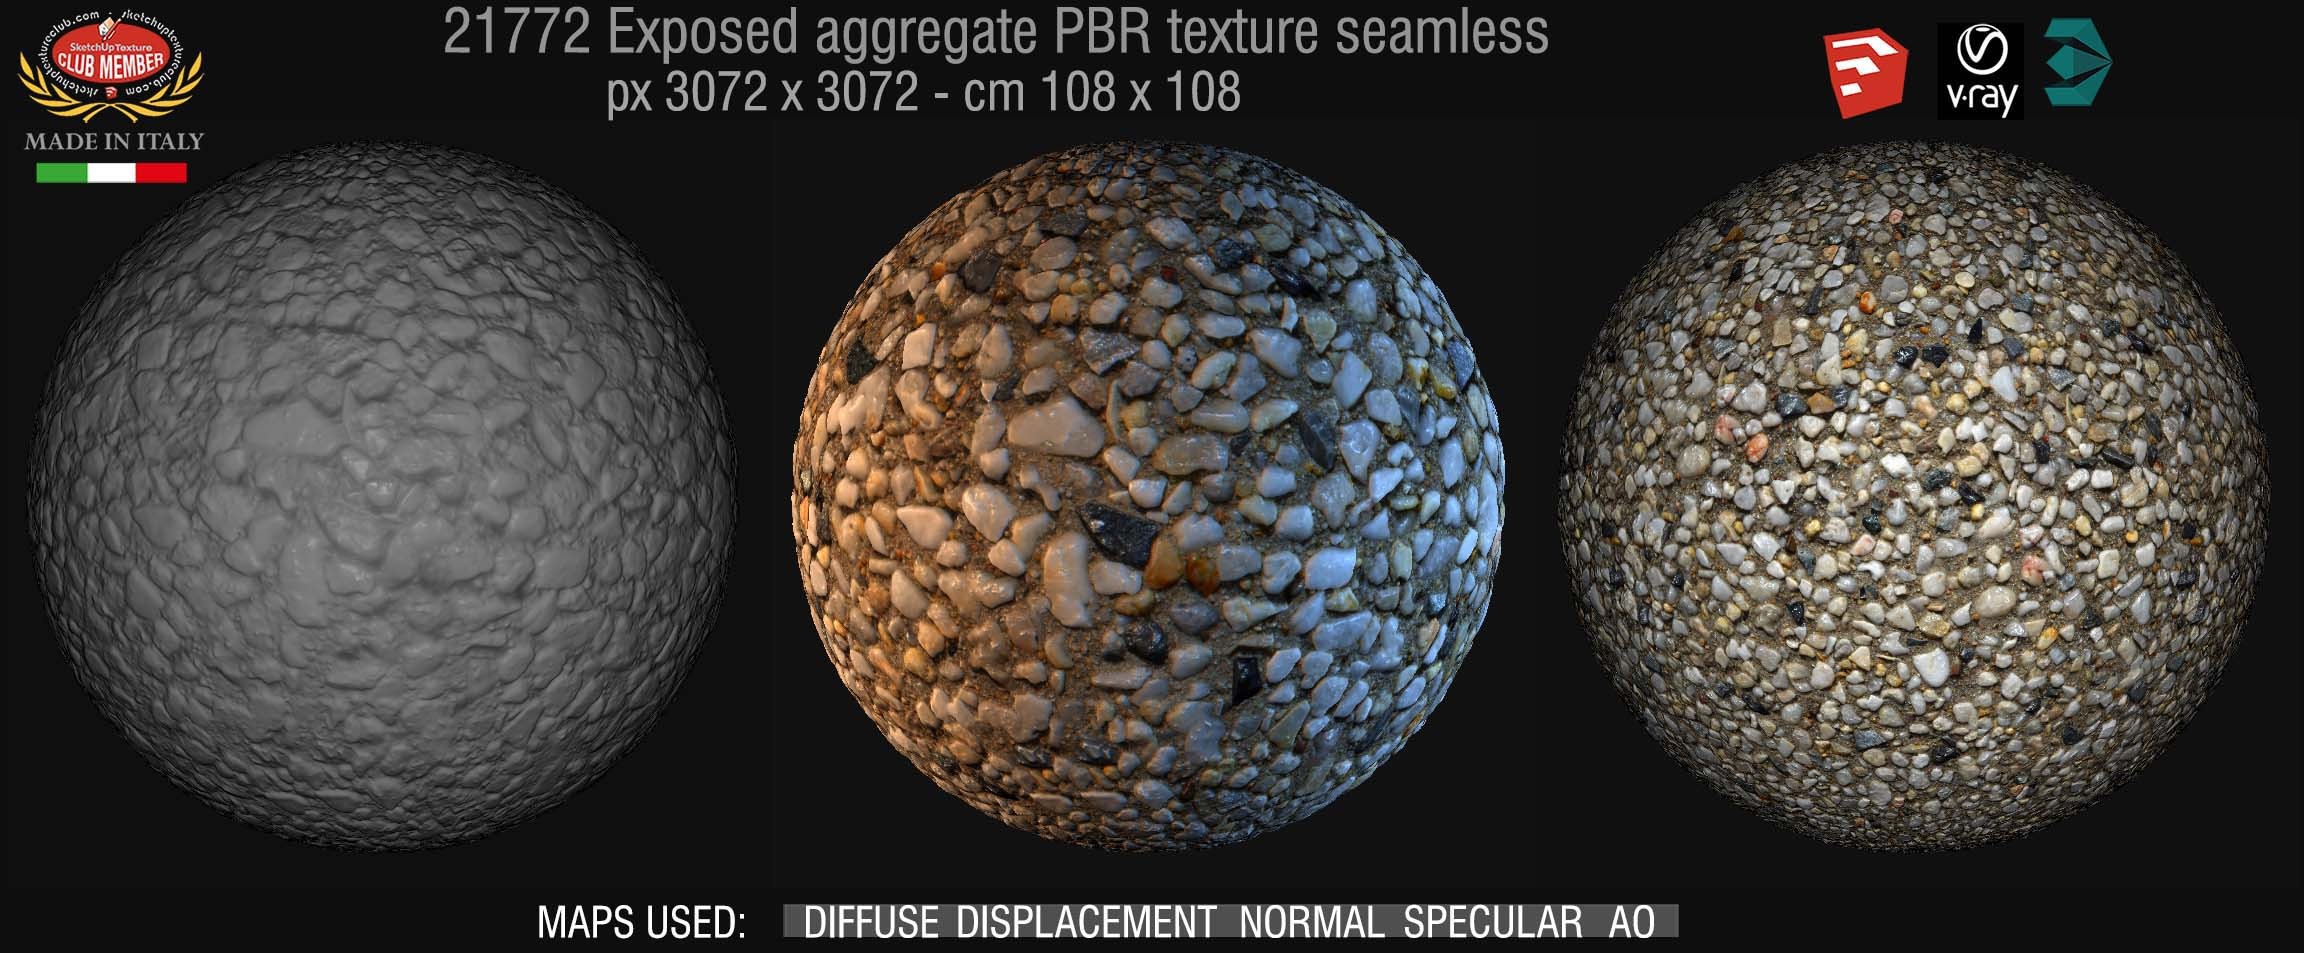 21772 Exposed aggregate PBR texture seamless DEMO